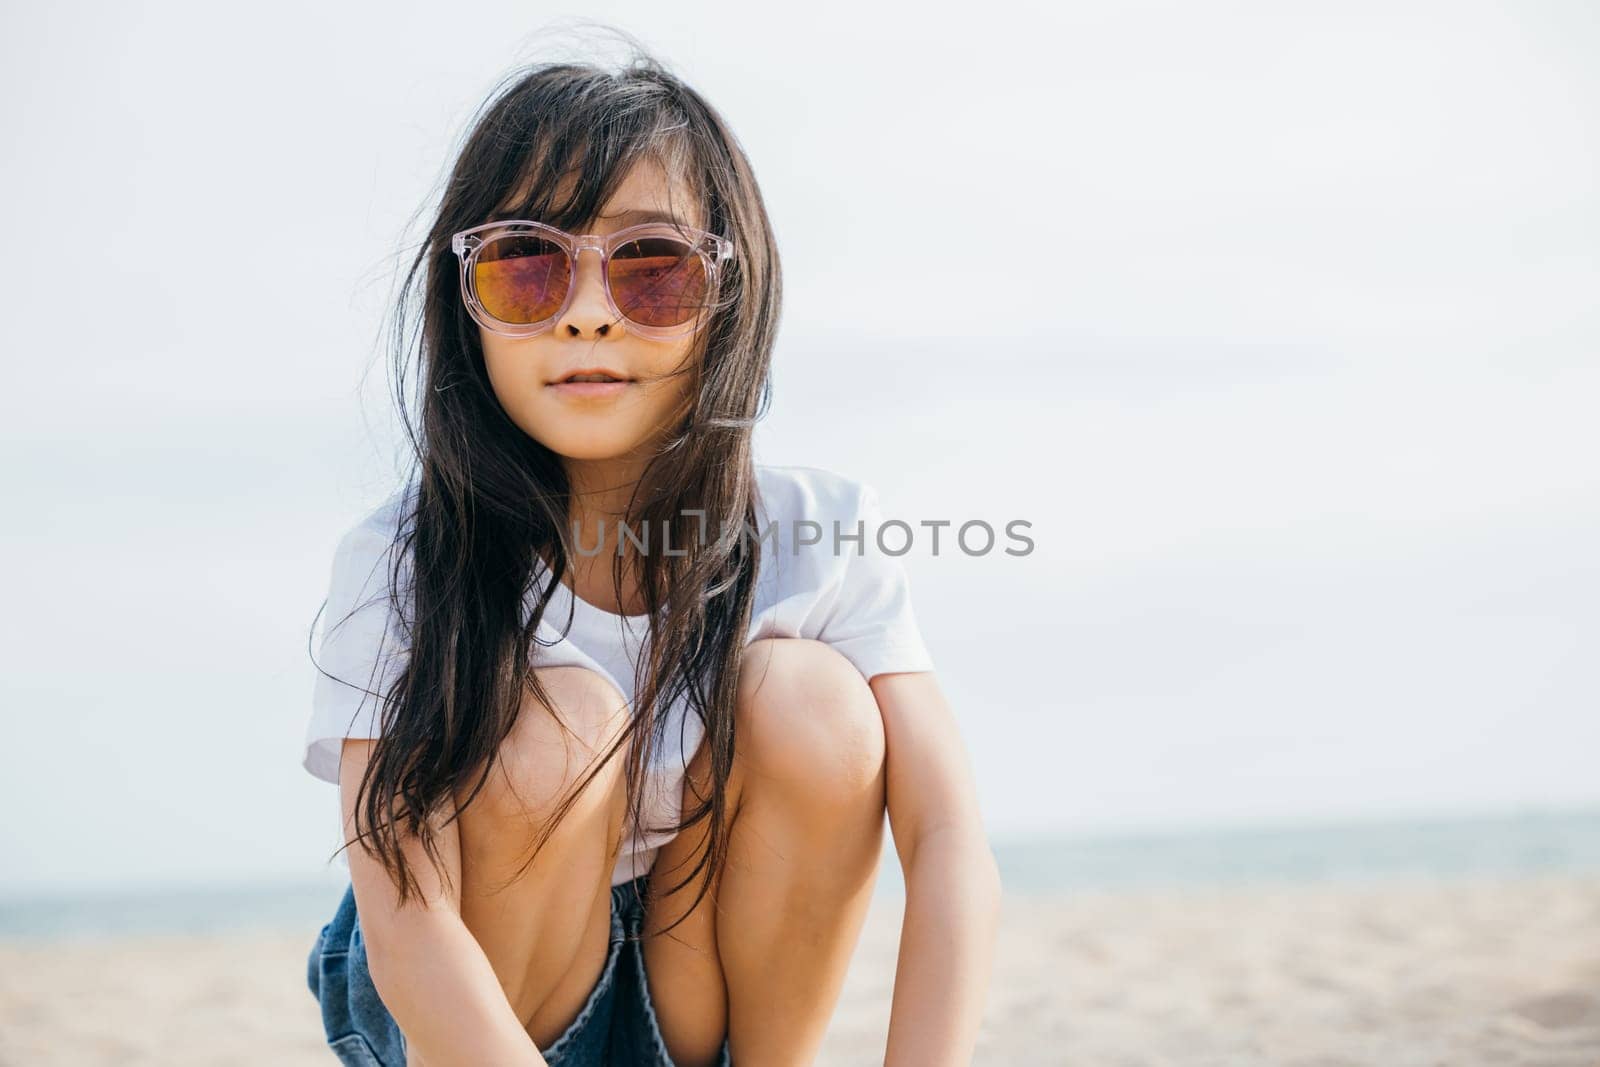 Beach style fashion, a child girl with trendy sunglasses sitting on a deck chair. Smiling portrait radiates joy and happiness. Windy hair stylish beachwear and carefree relaxation by Sorapop